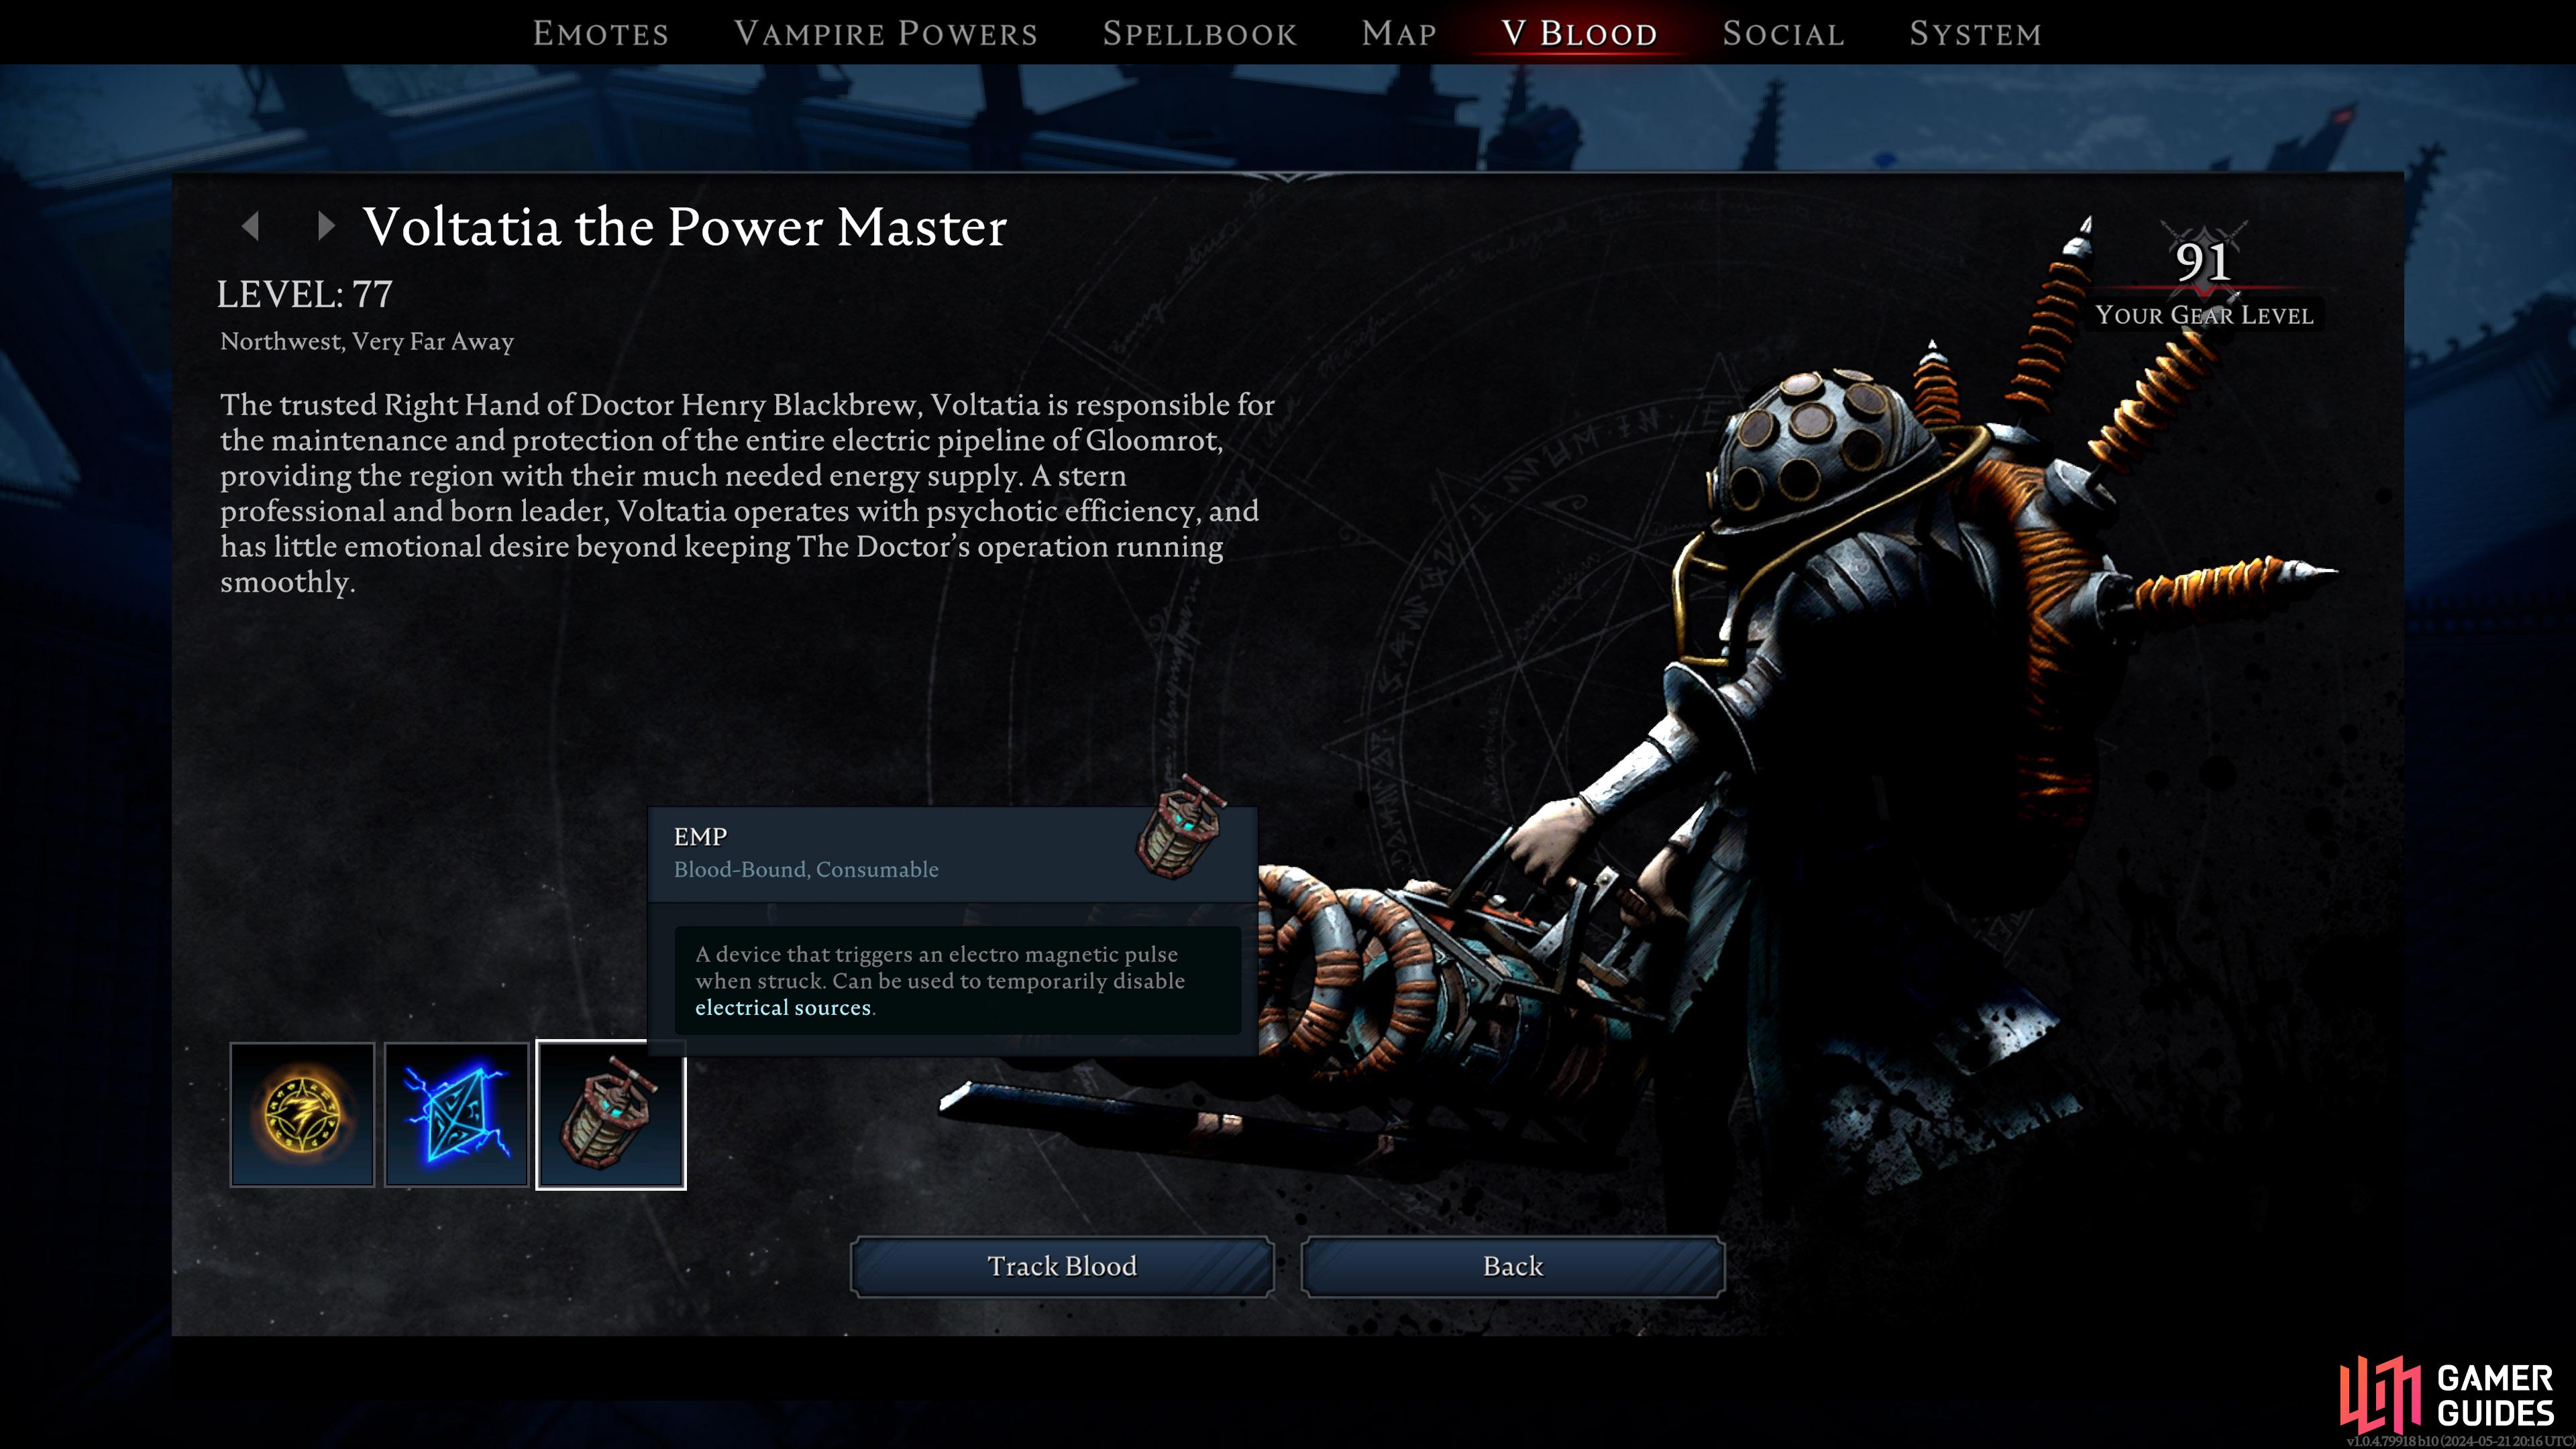 You can unlock the EMP and Power Charge recipes by defeating Voltatia the Power Master.